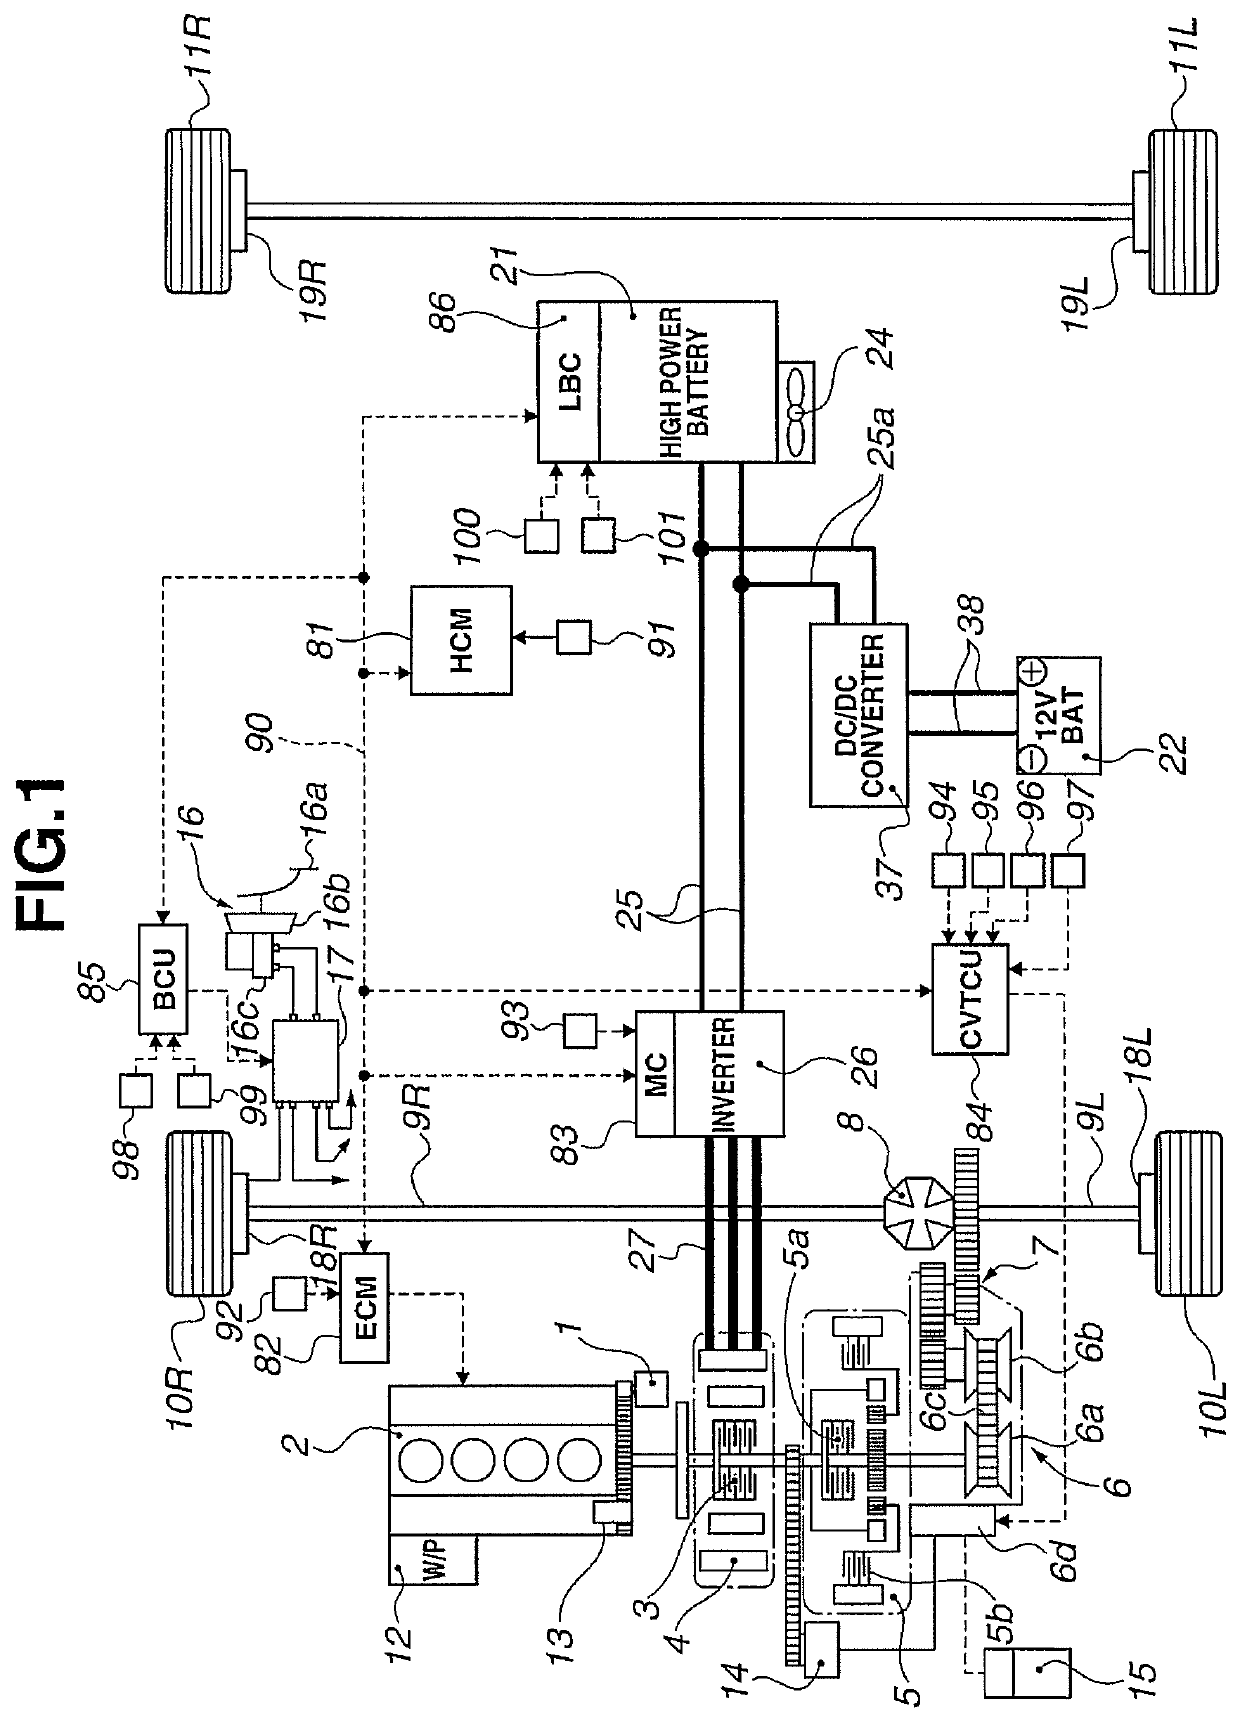 Vehicle oil pump driving control device